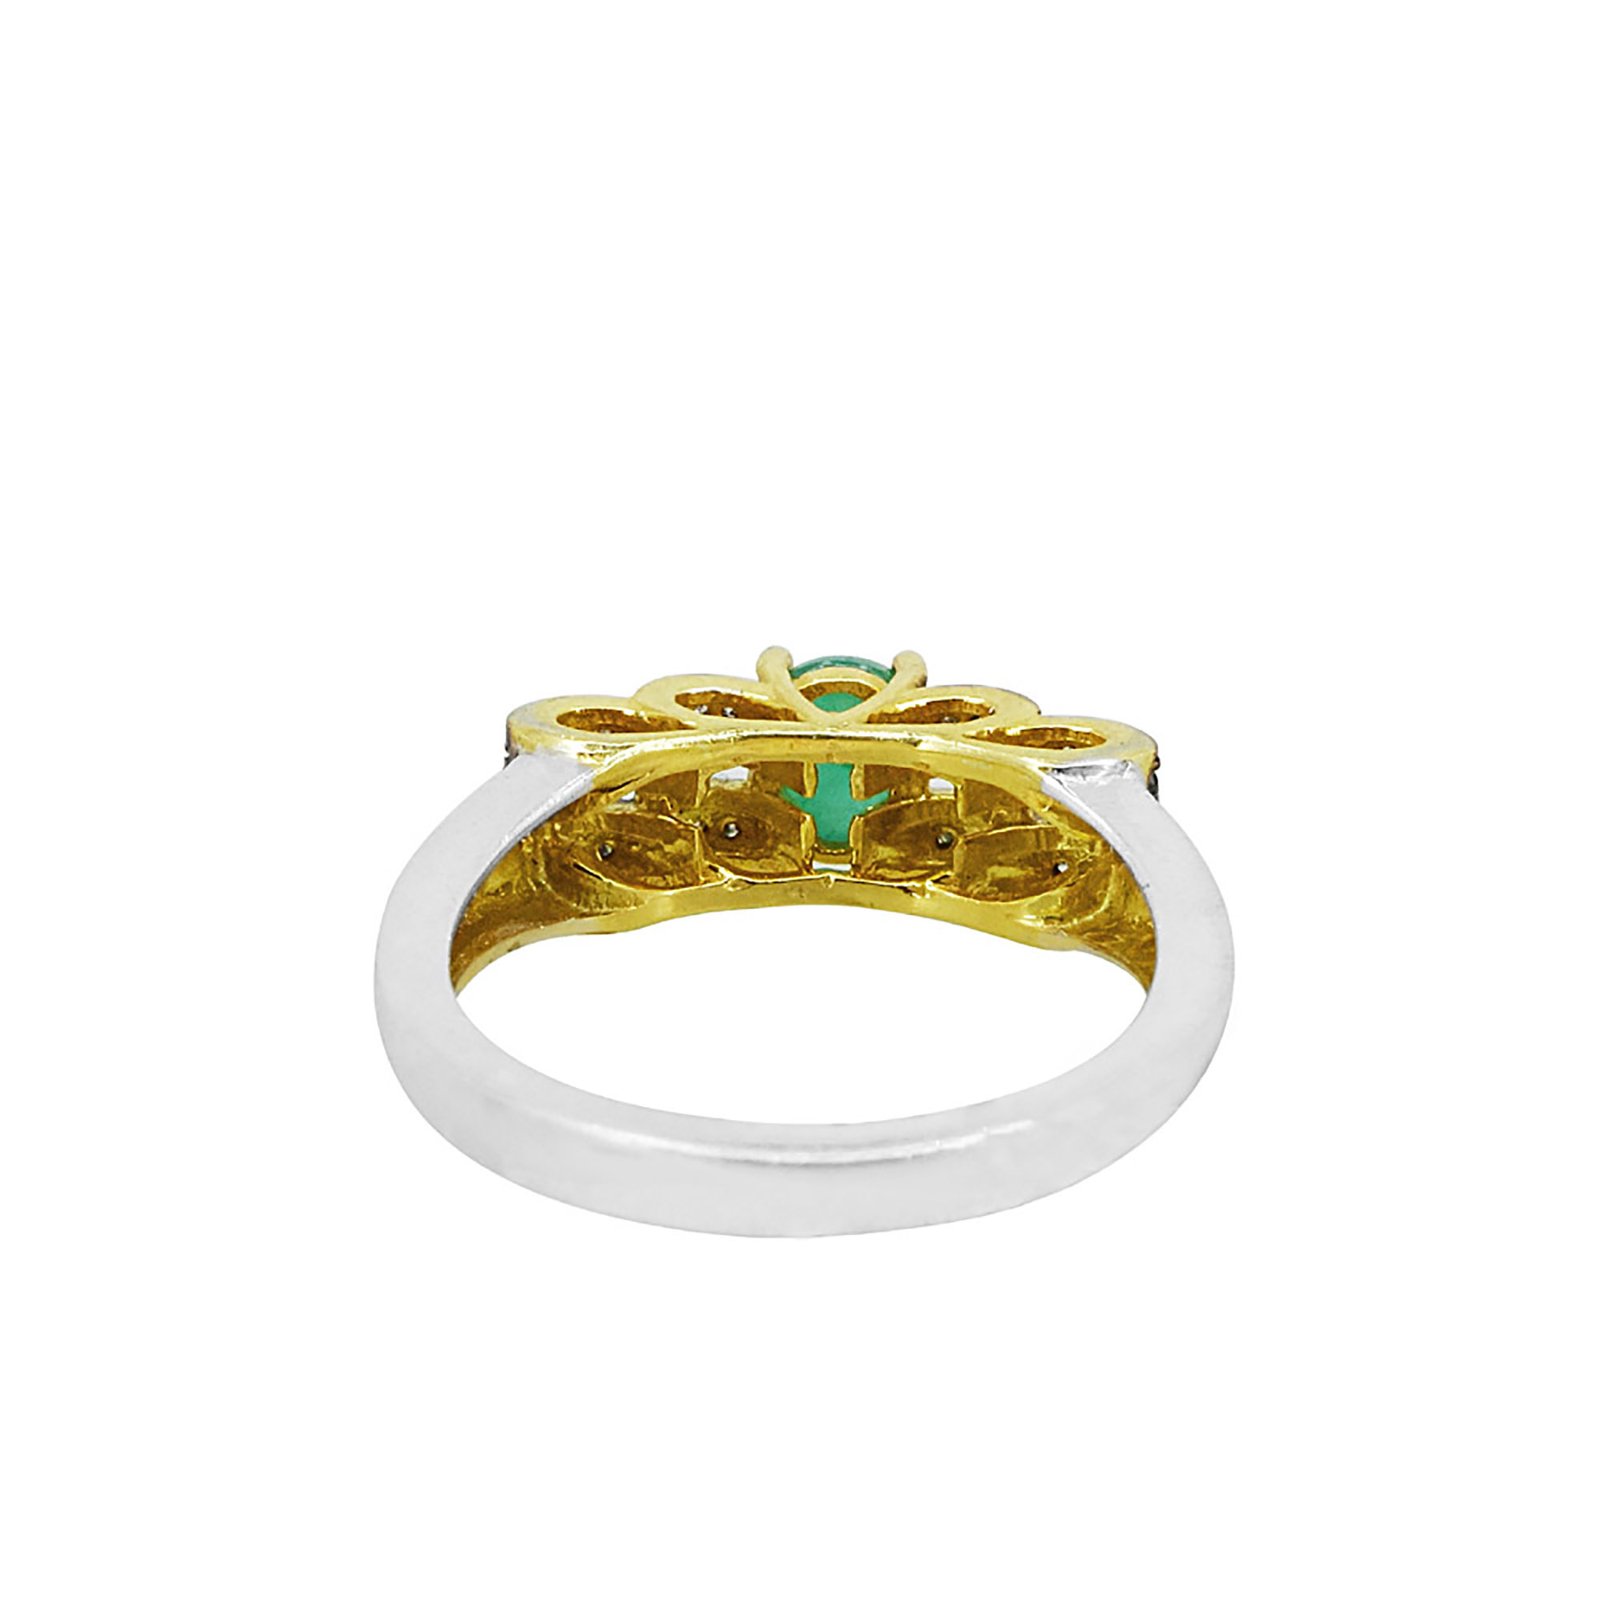 Real emerald & diamond engagement ring set in 14k gold 925 silver